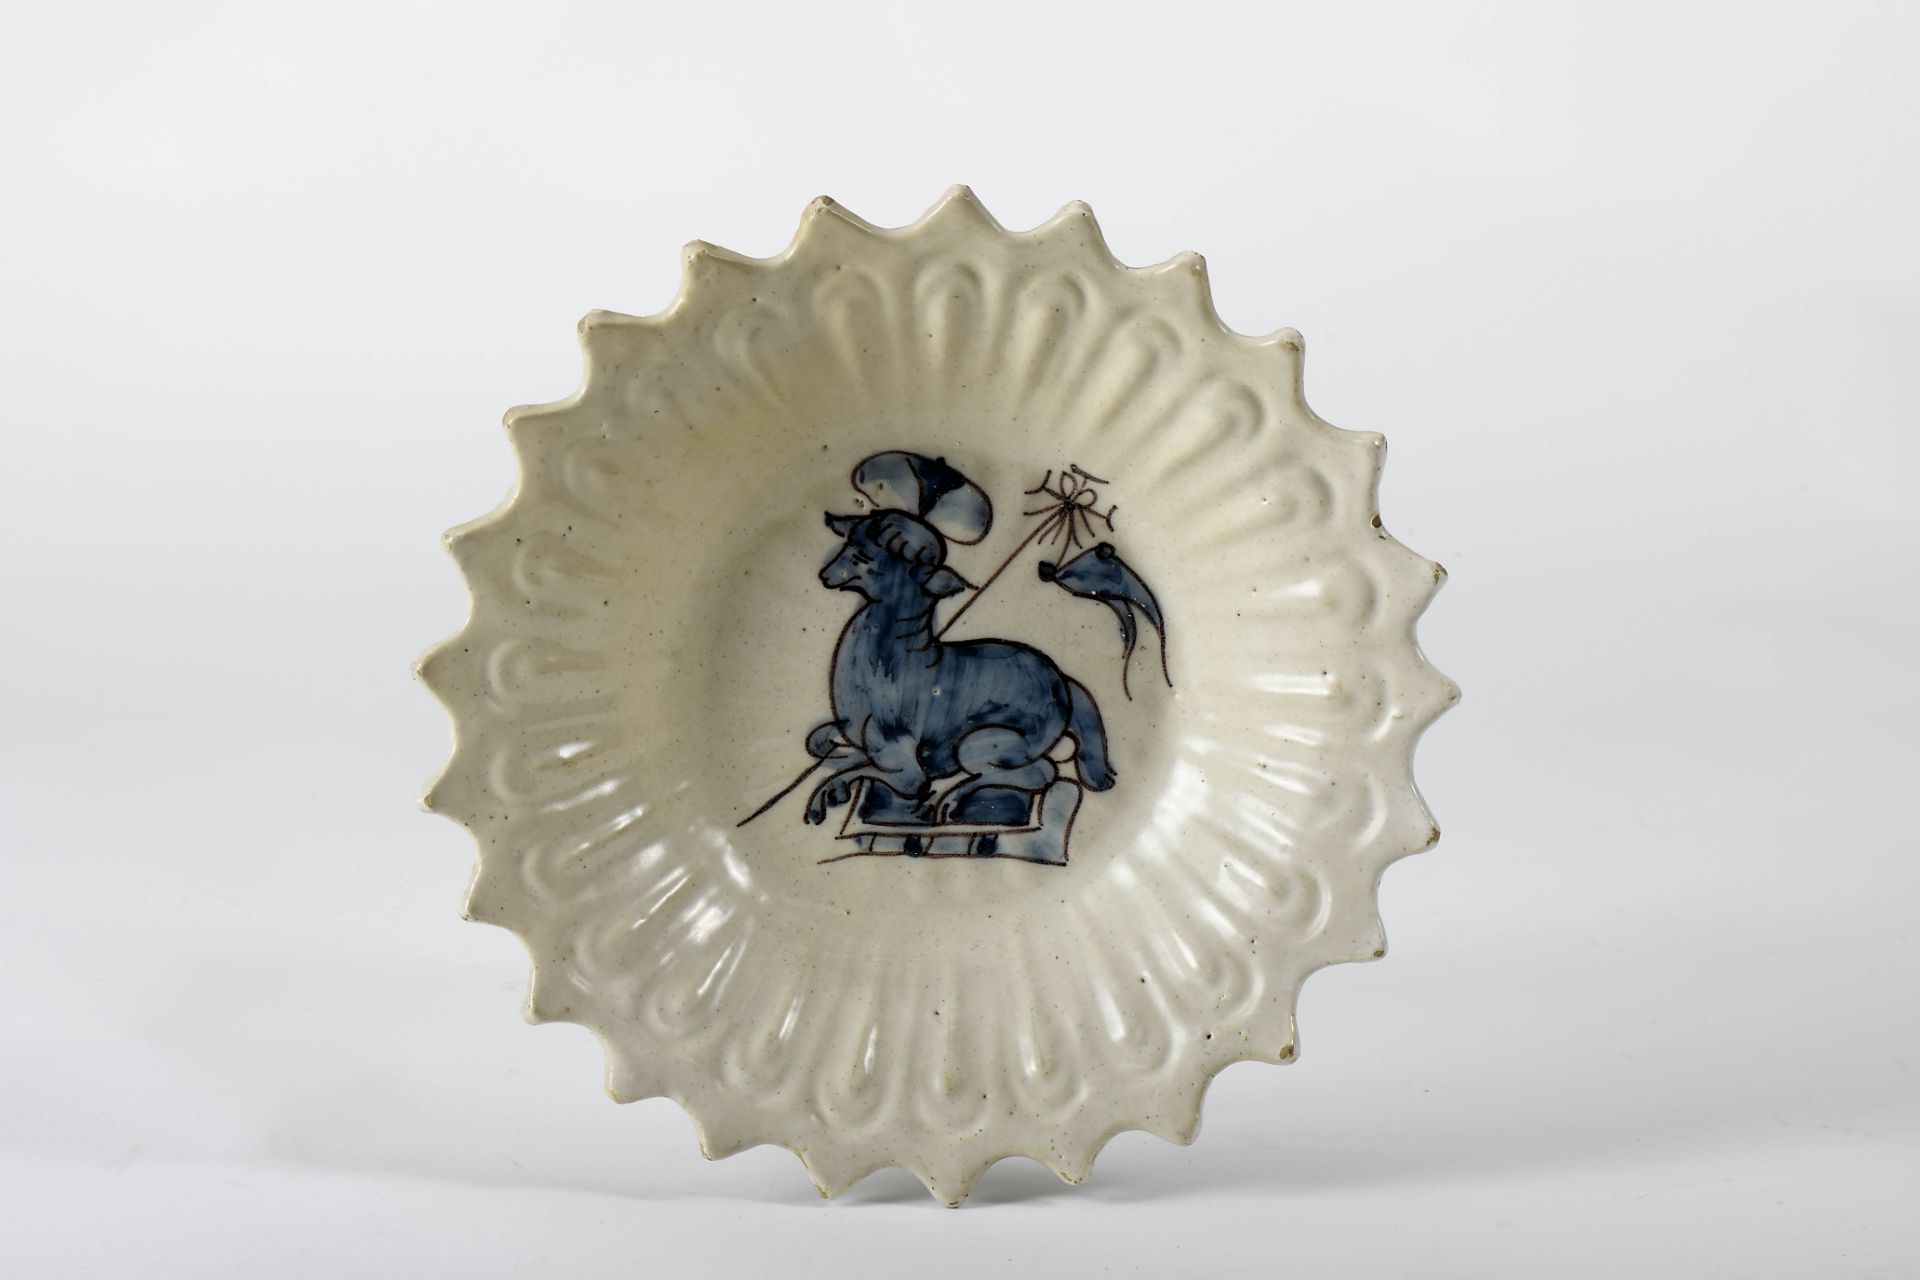 A scalloped cup with foot